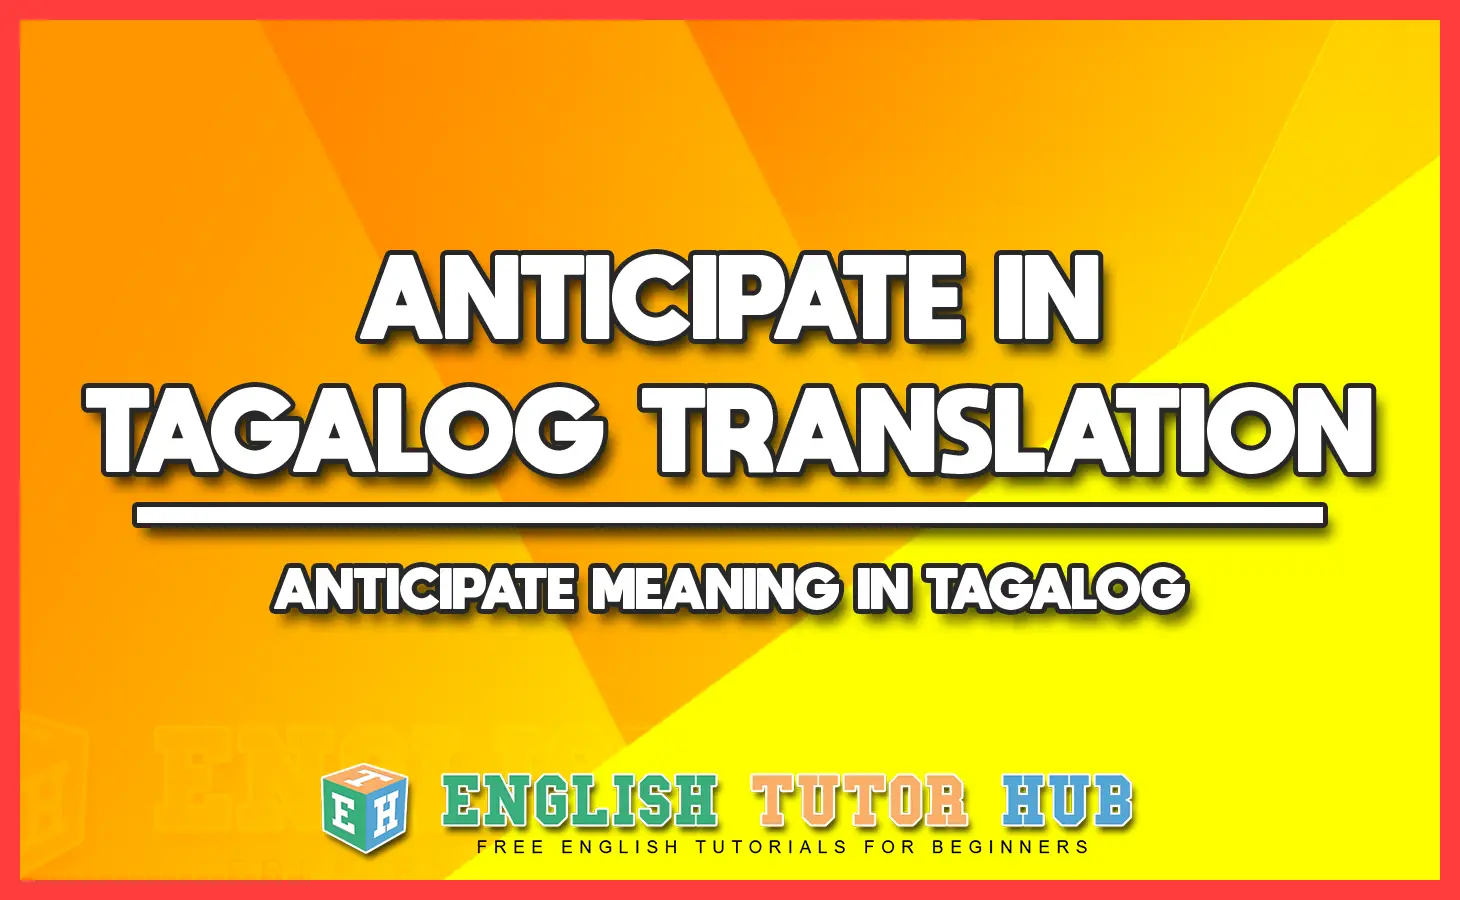 ANTICIPATE IN TAGALOG TRANSLATION - ANTICIPATE MEANING IN TAGALOG